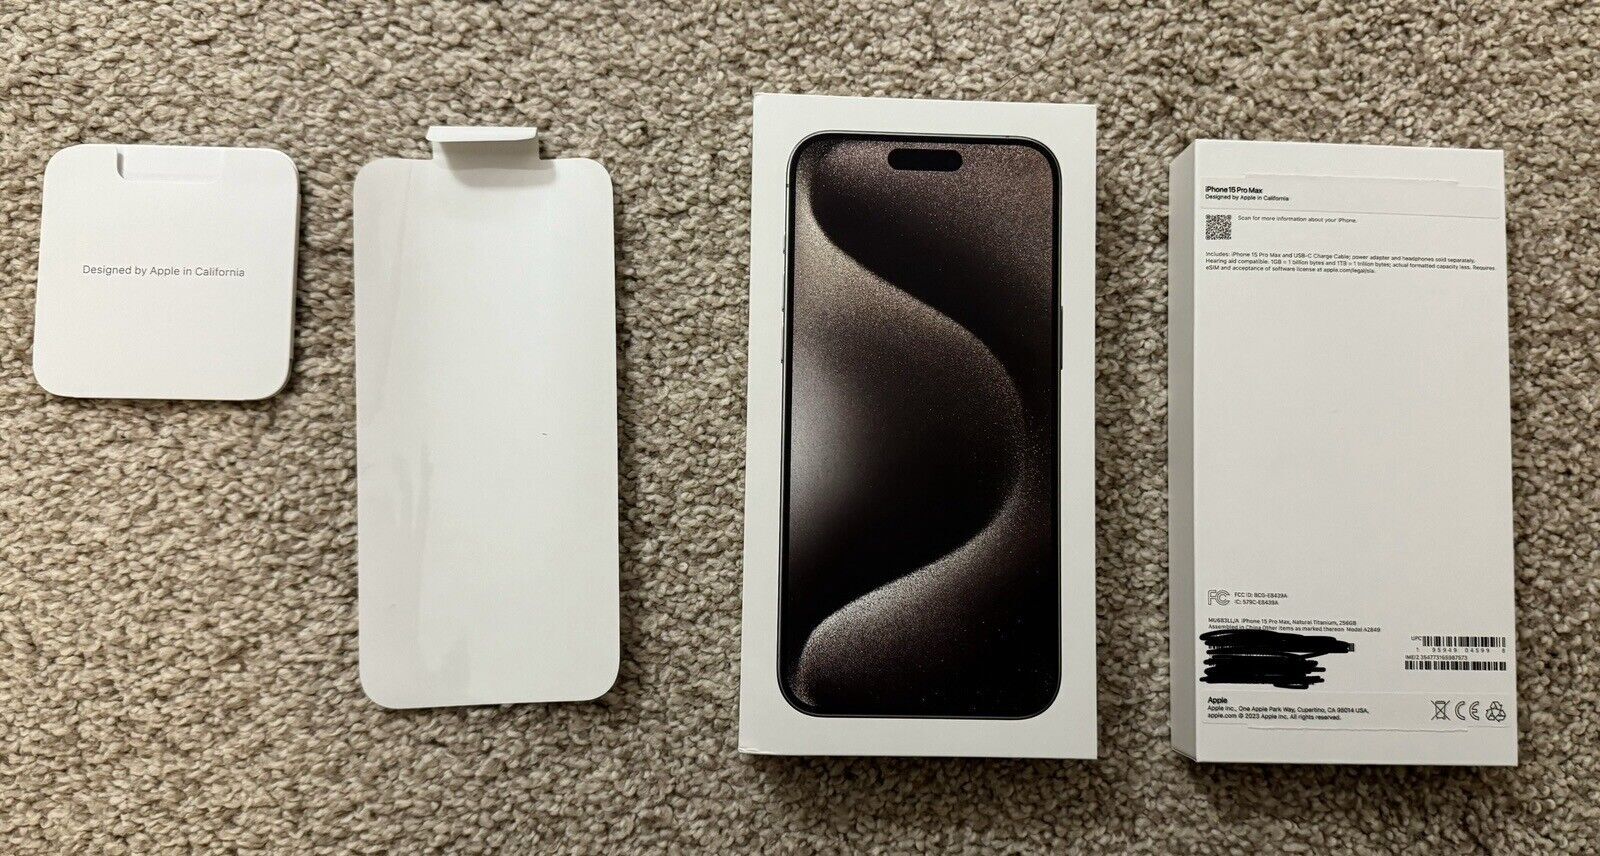 By this coming summer, Apple will be able to install iOS updates on iPhone units inside never-opened boxes - This summer, U.S. Apple Stores will update iOS on iPhone units inside never-opened boxes